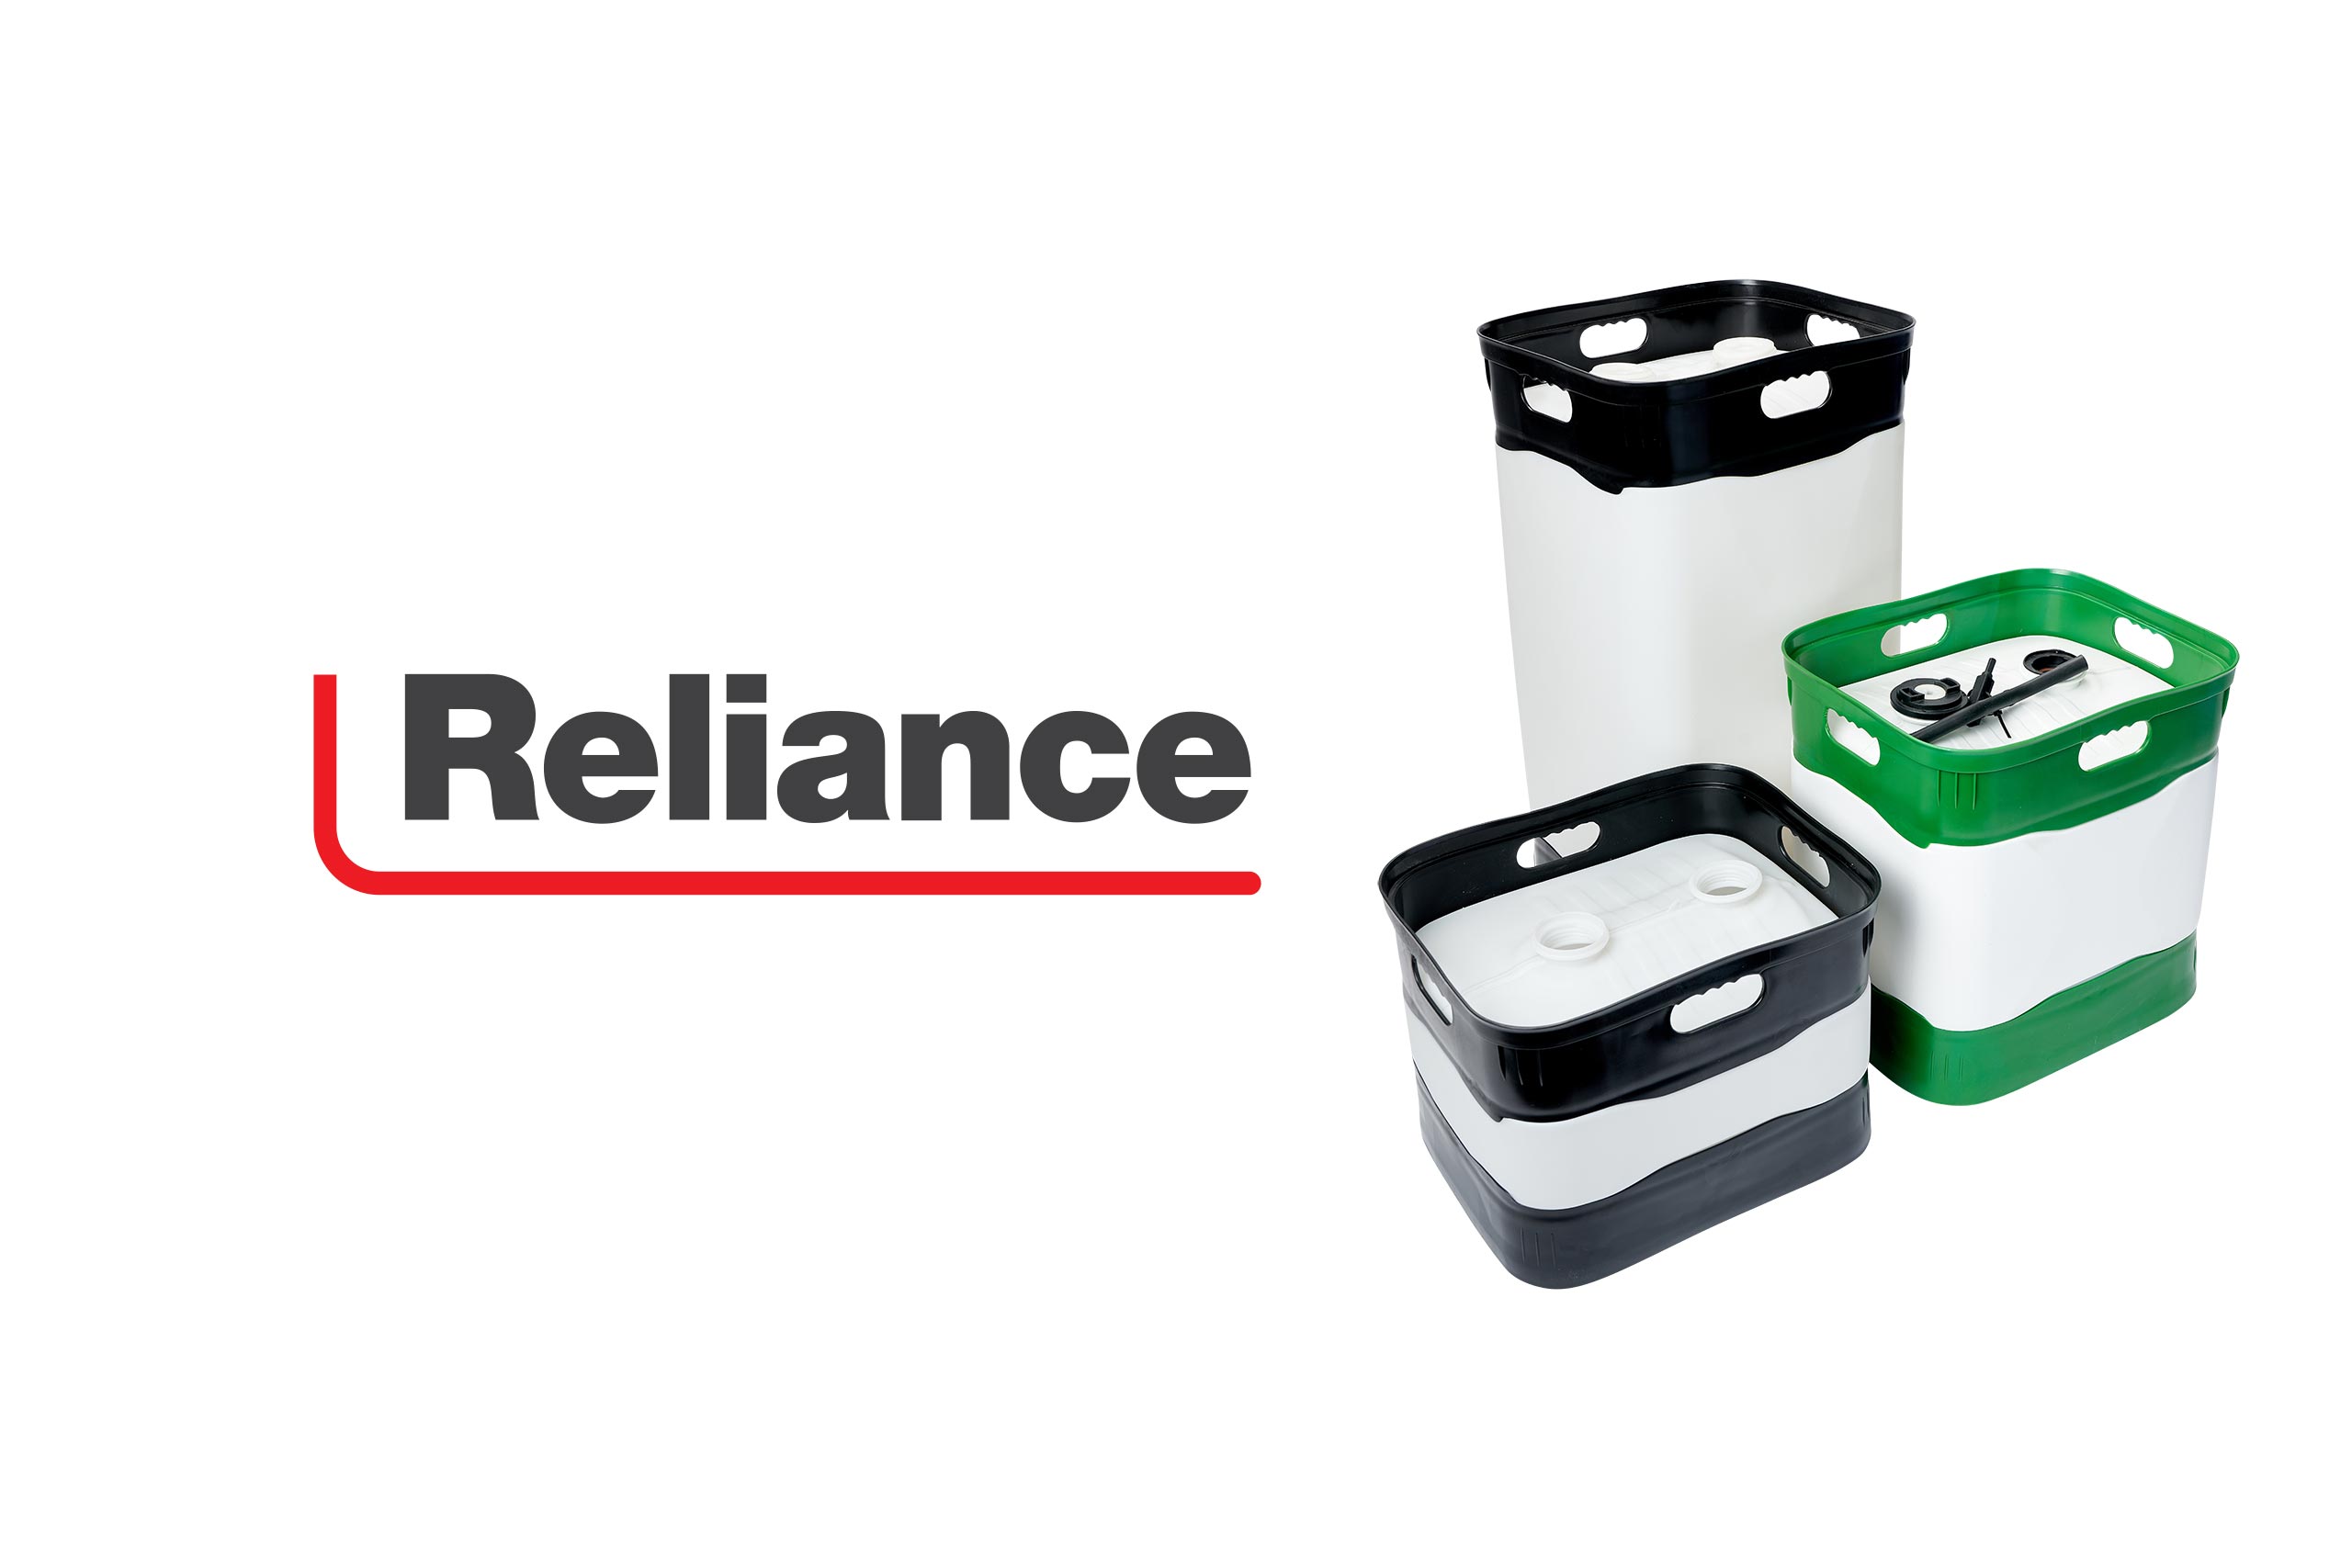 Greif Acquires Reliance Products, Ltd.